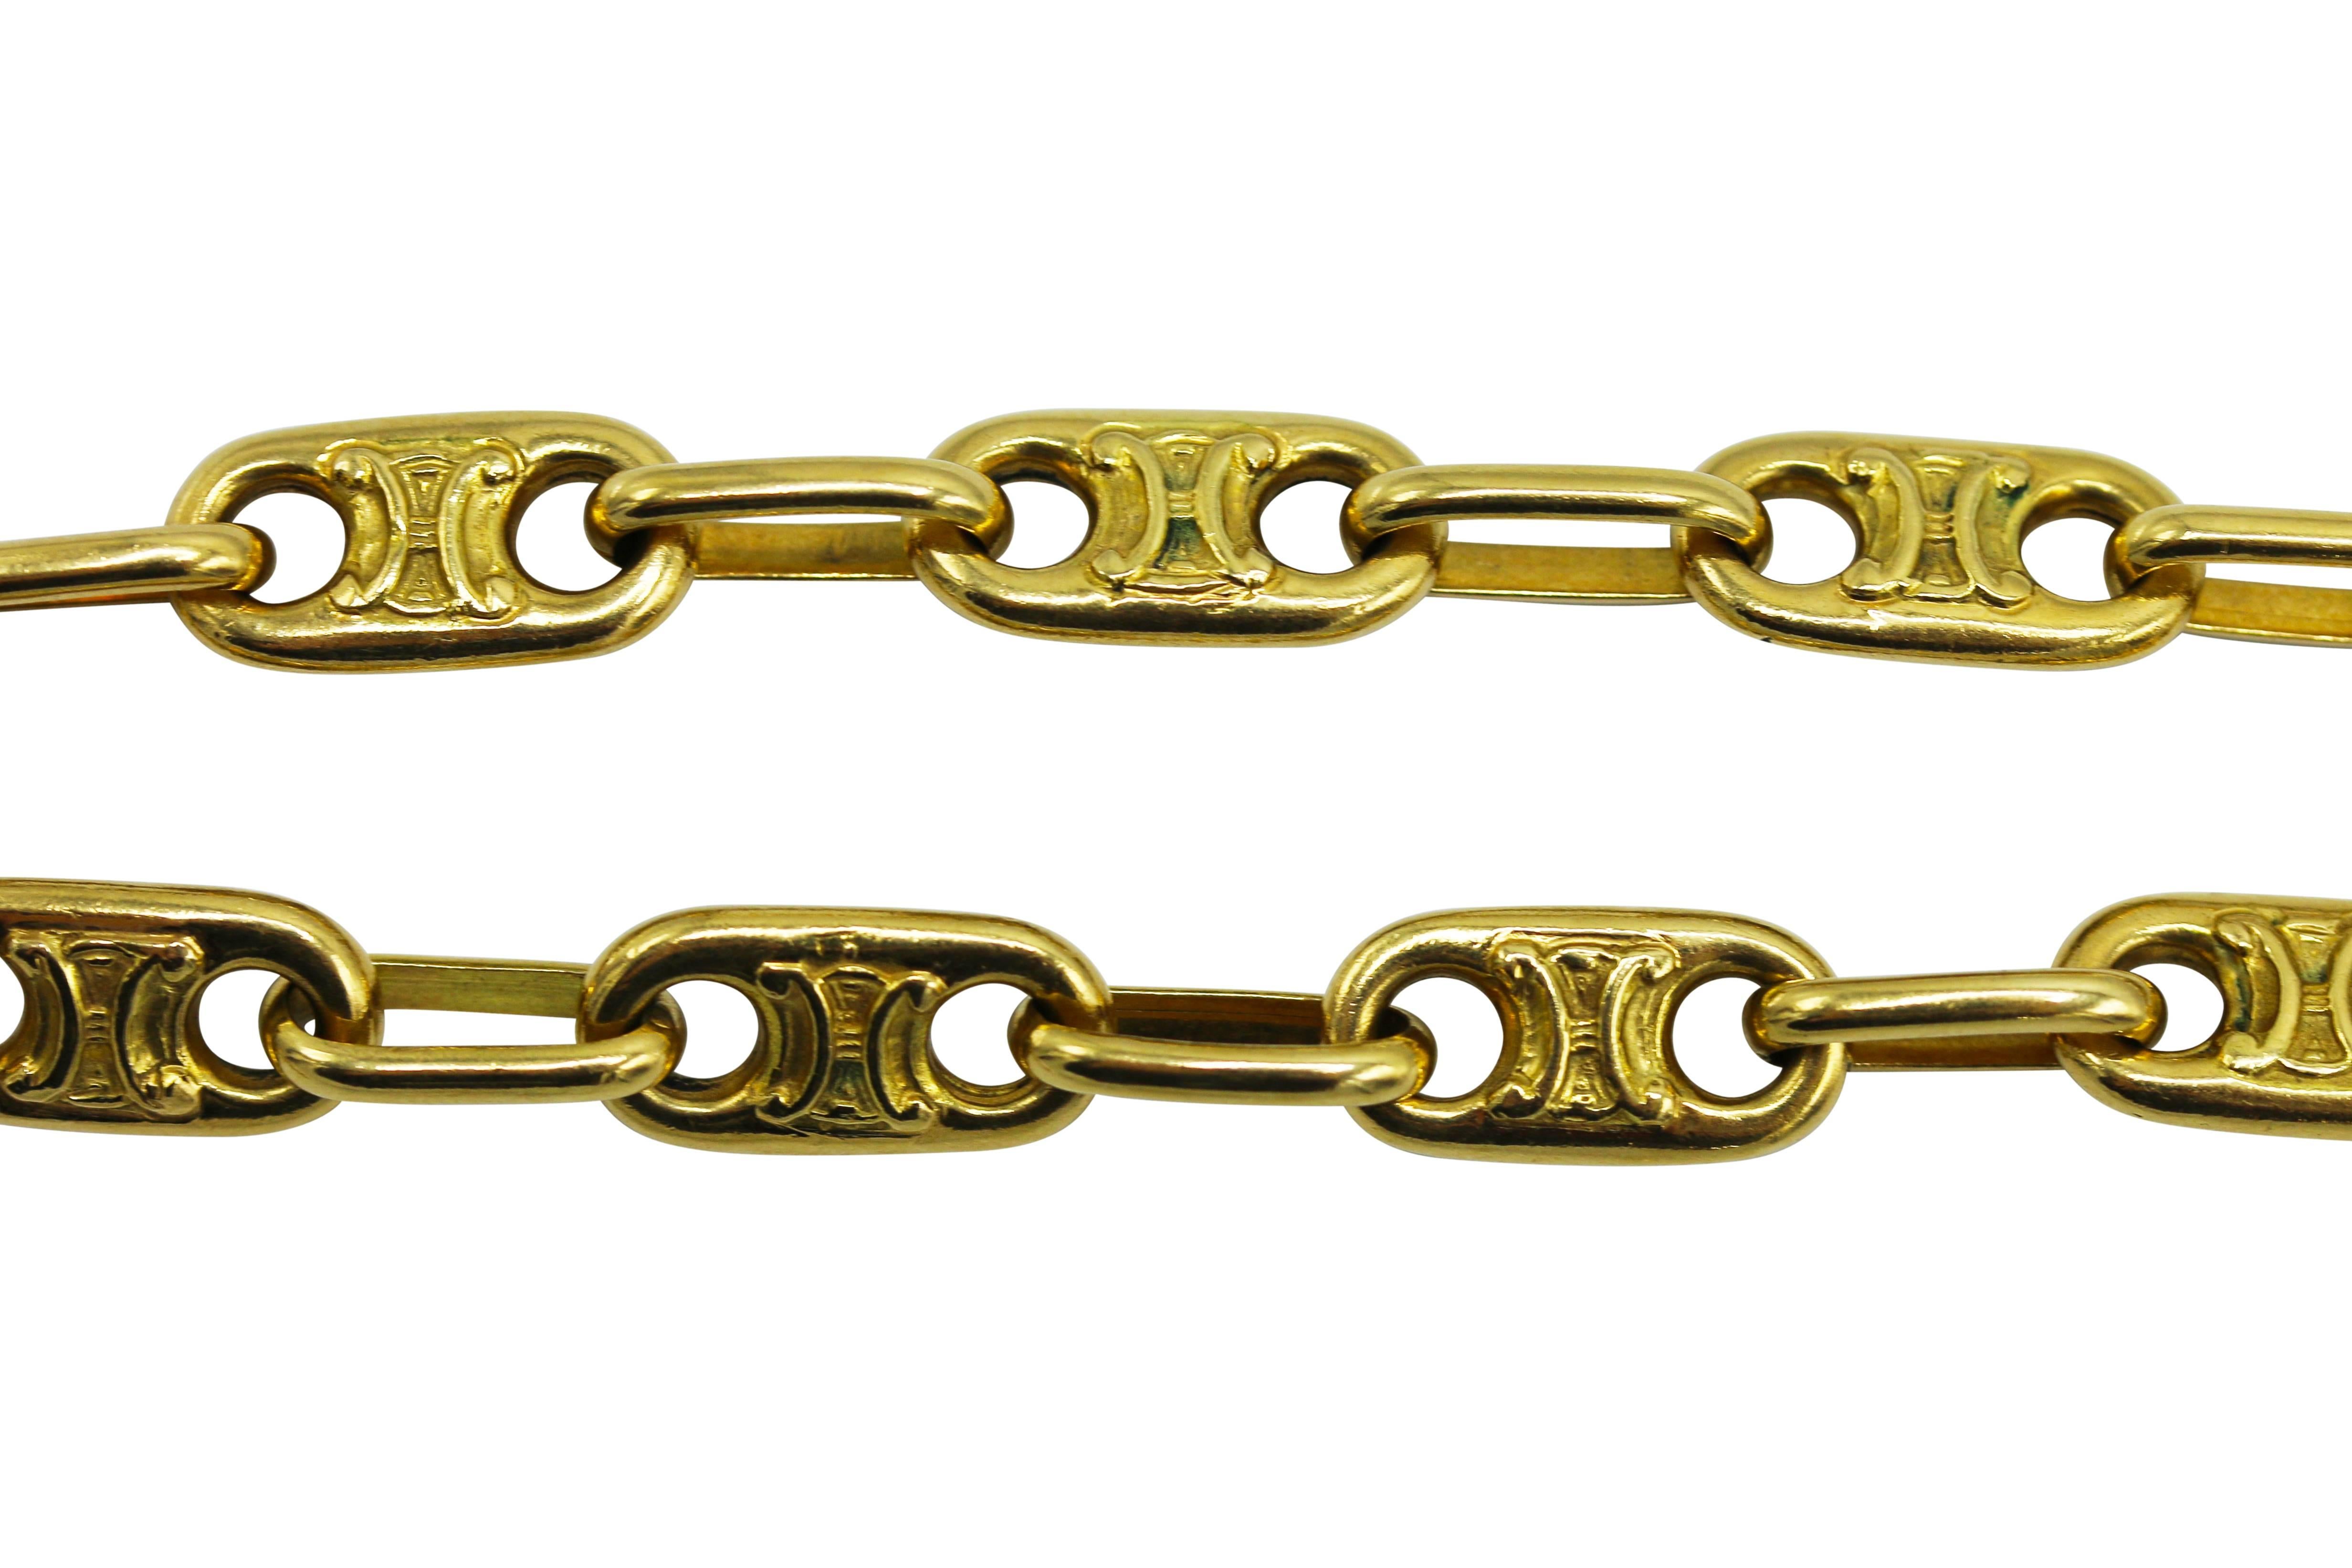 18 karat yellow gold fancy link long chain necklace, circa 1970, designed as a series of oval gold links with stylized H shape in the center in raised gold, gross weight 185.0 grams, length 42 inches, width 1/4 inch. 
A great addition to any jewelry